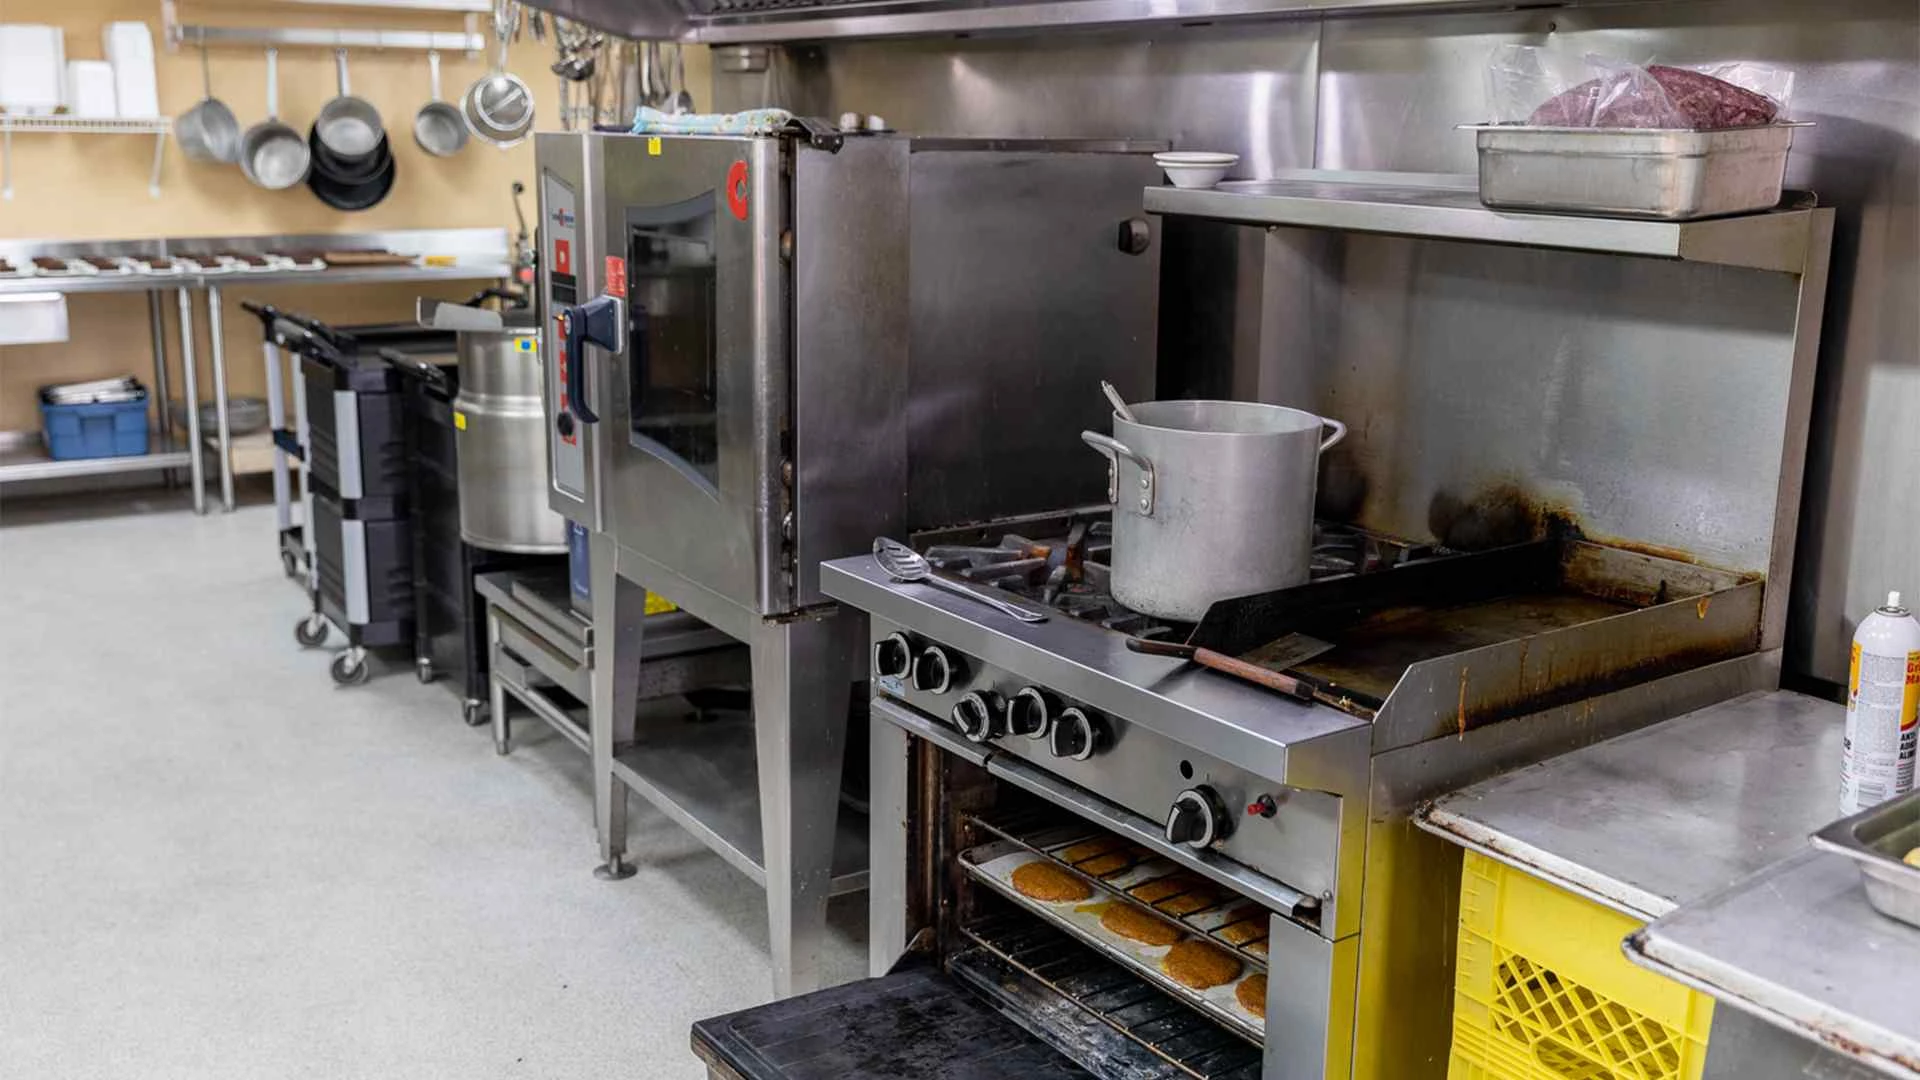 Clean and Hygienic kitchen at CV